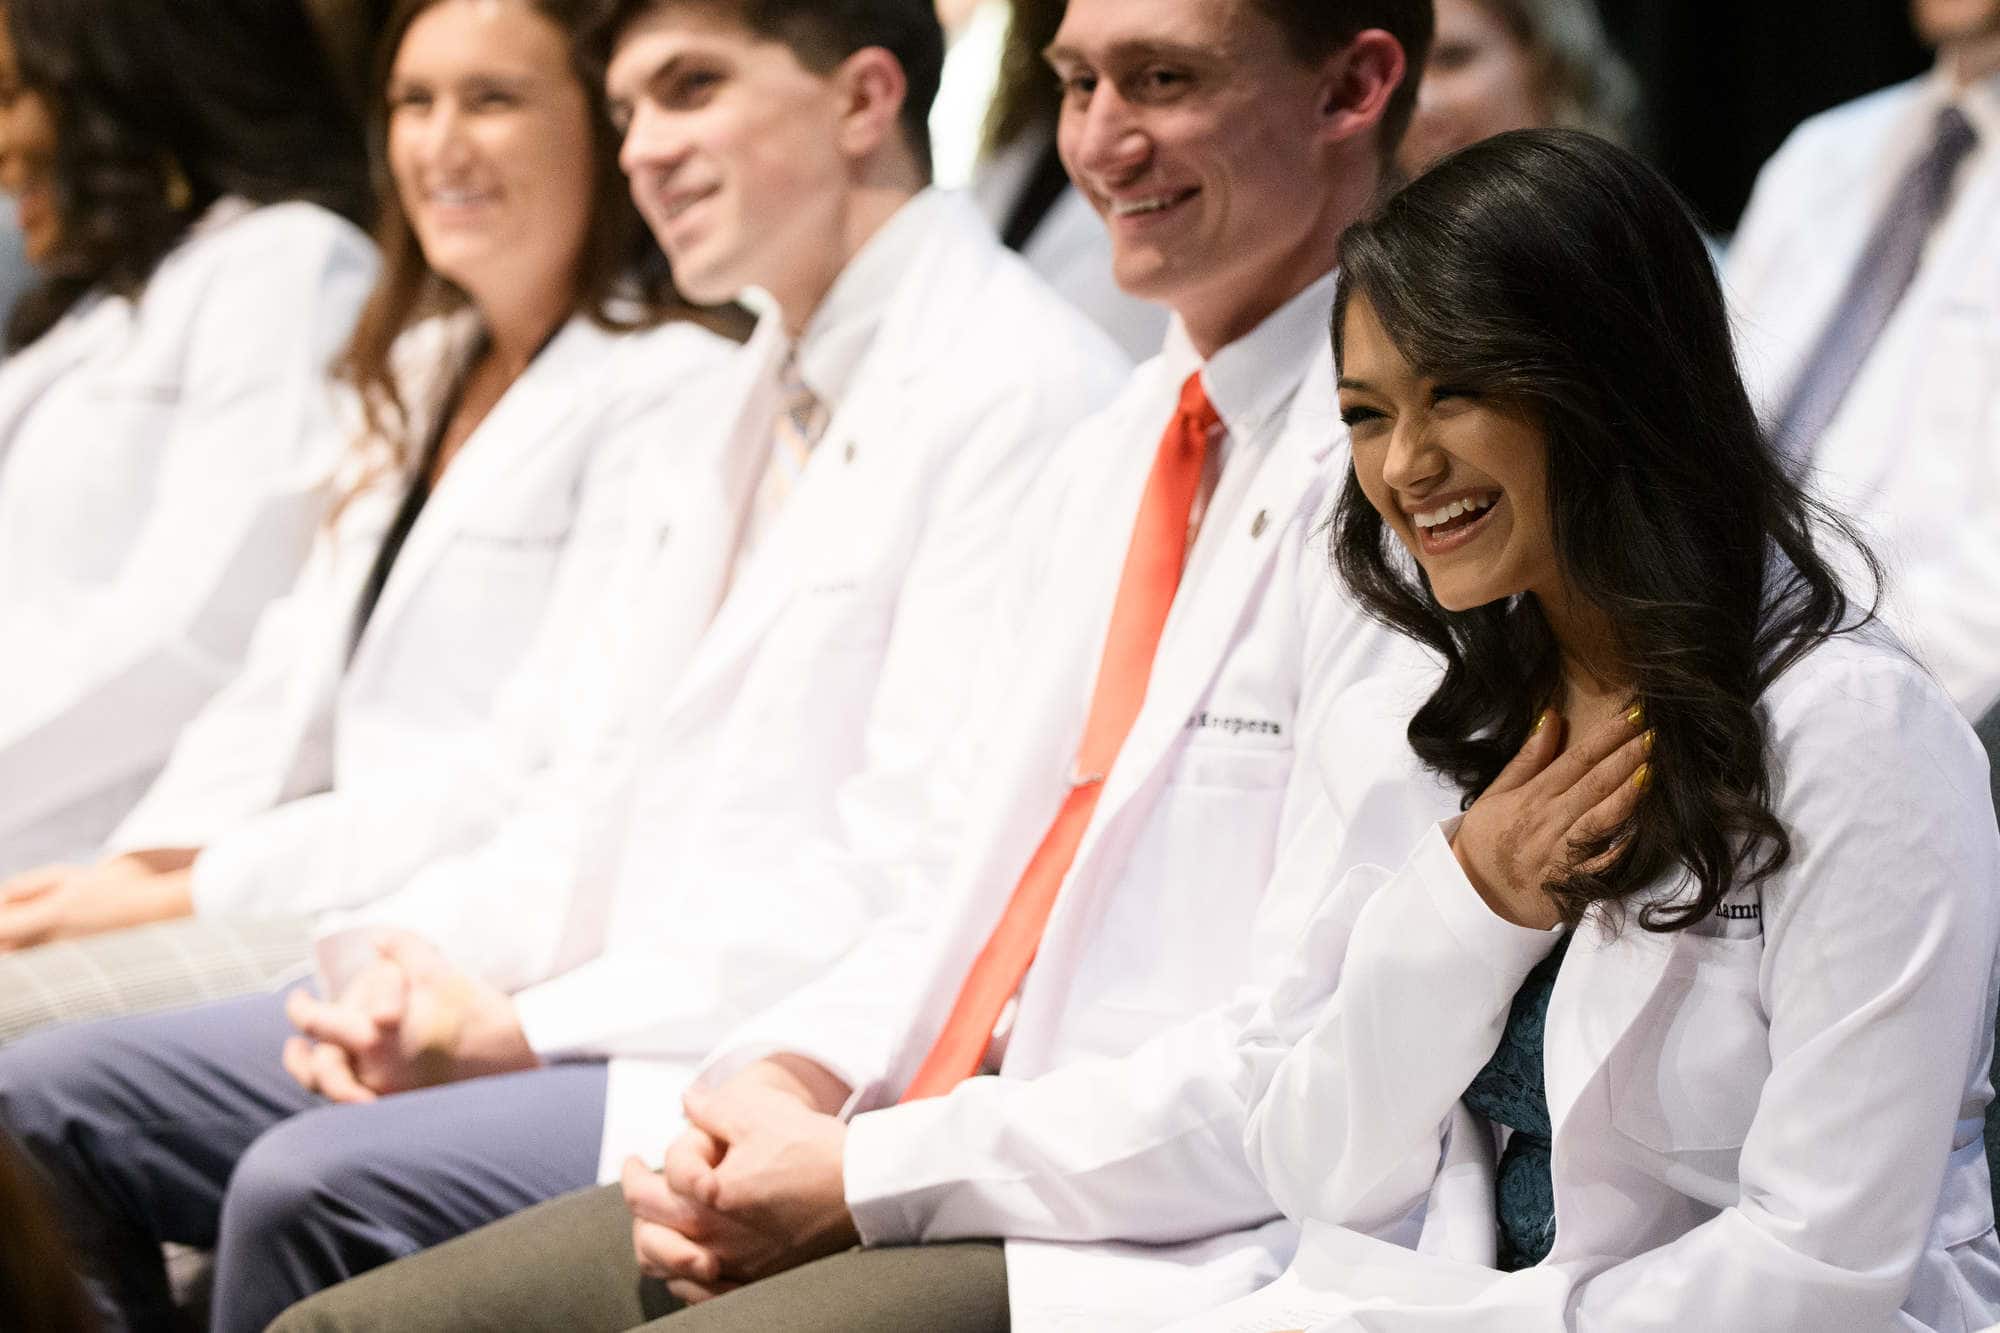 Physical therapy students at a white coat ceremony